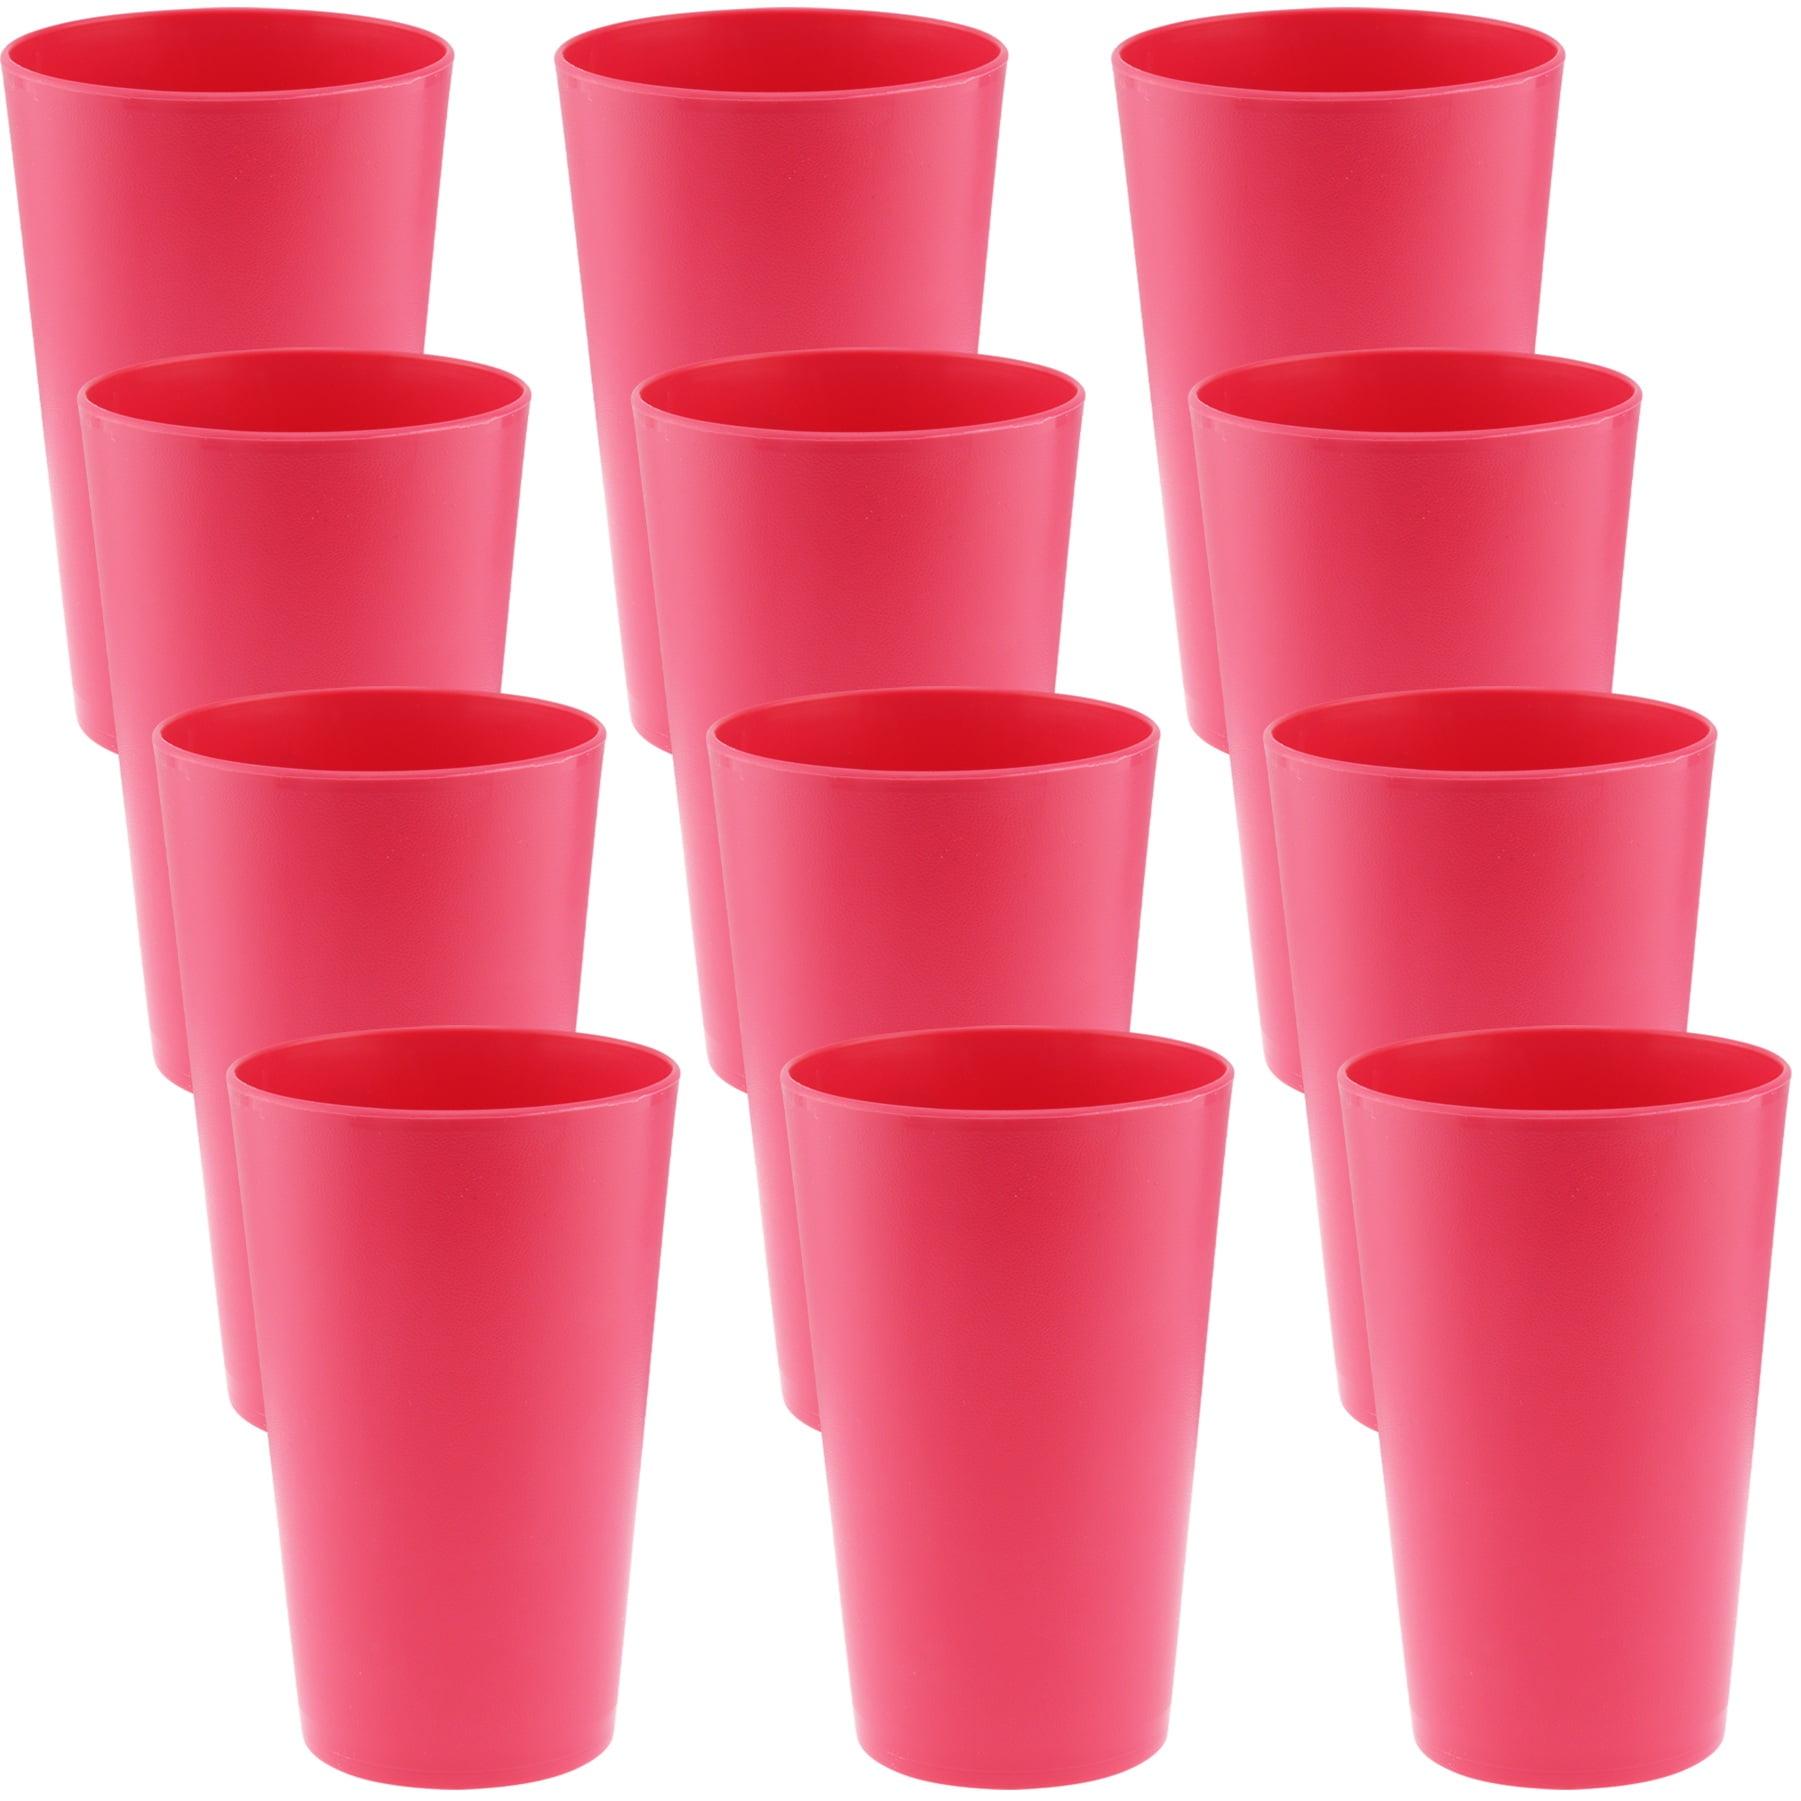 YUYUHUA Plastic Cups Reusable - Unbreakable Glasses